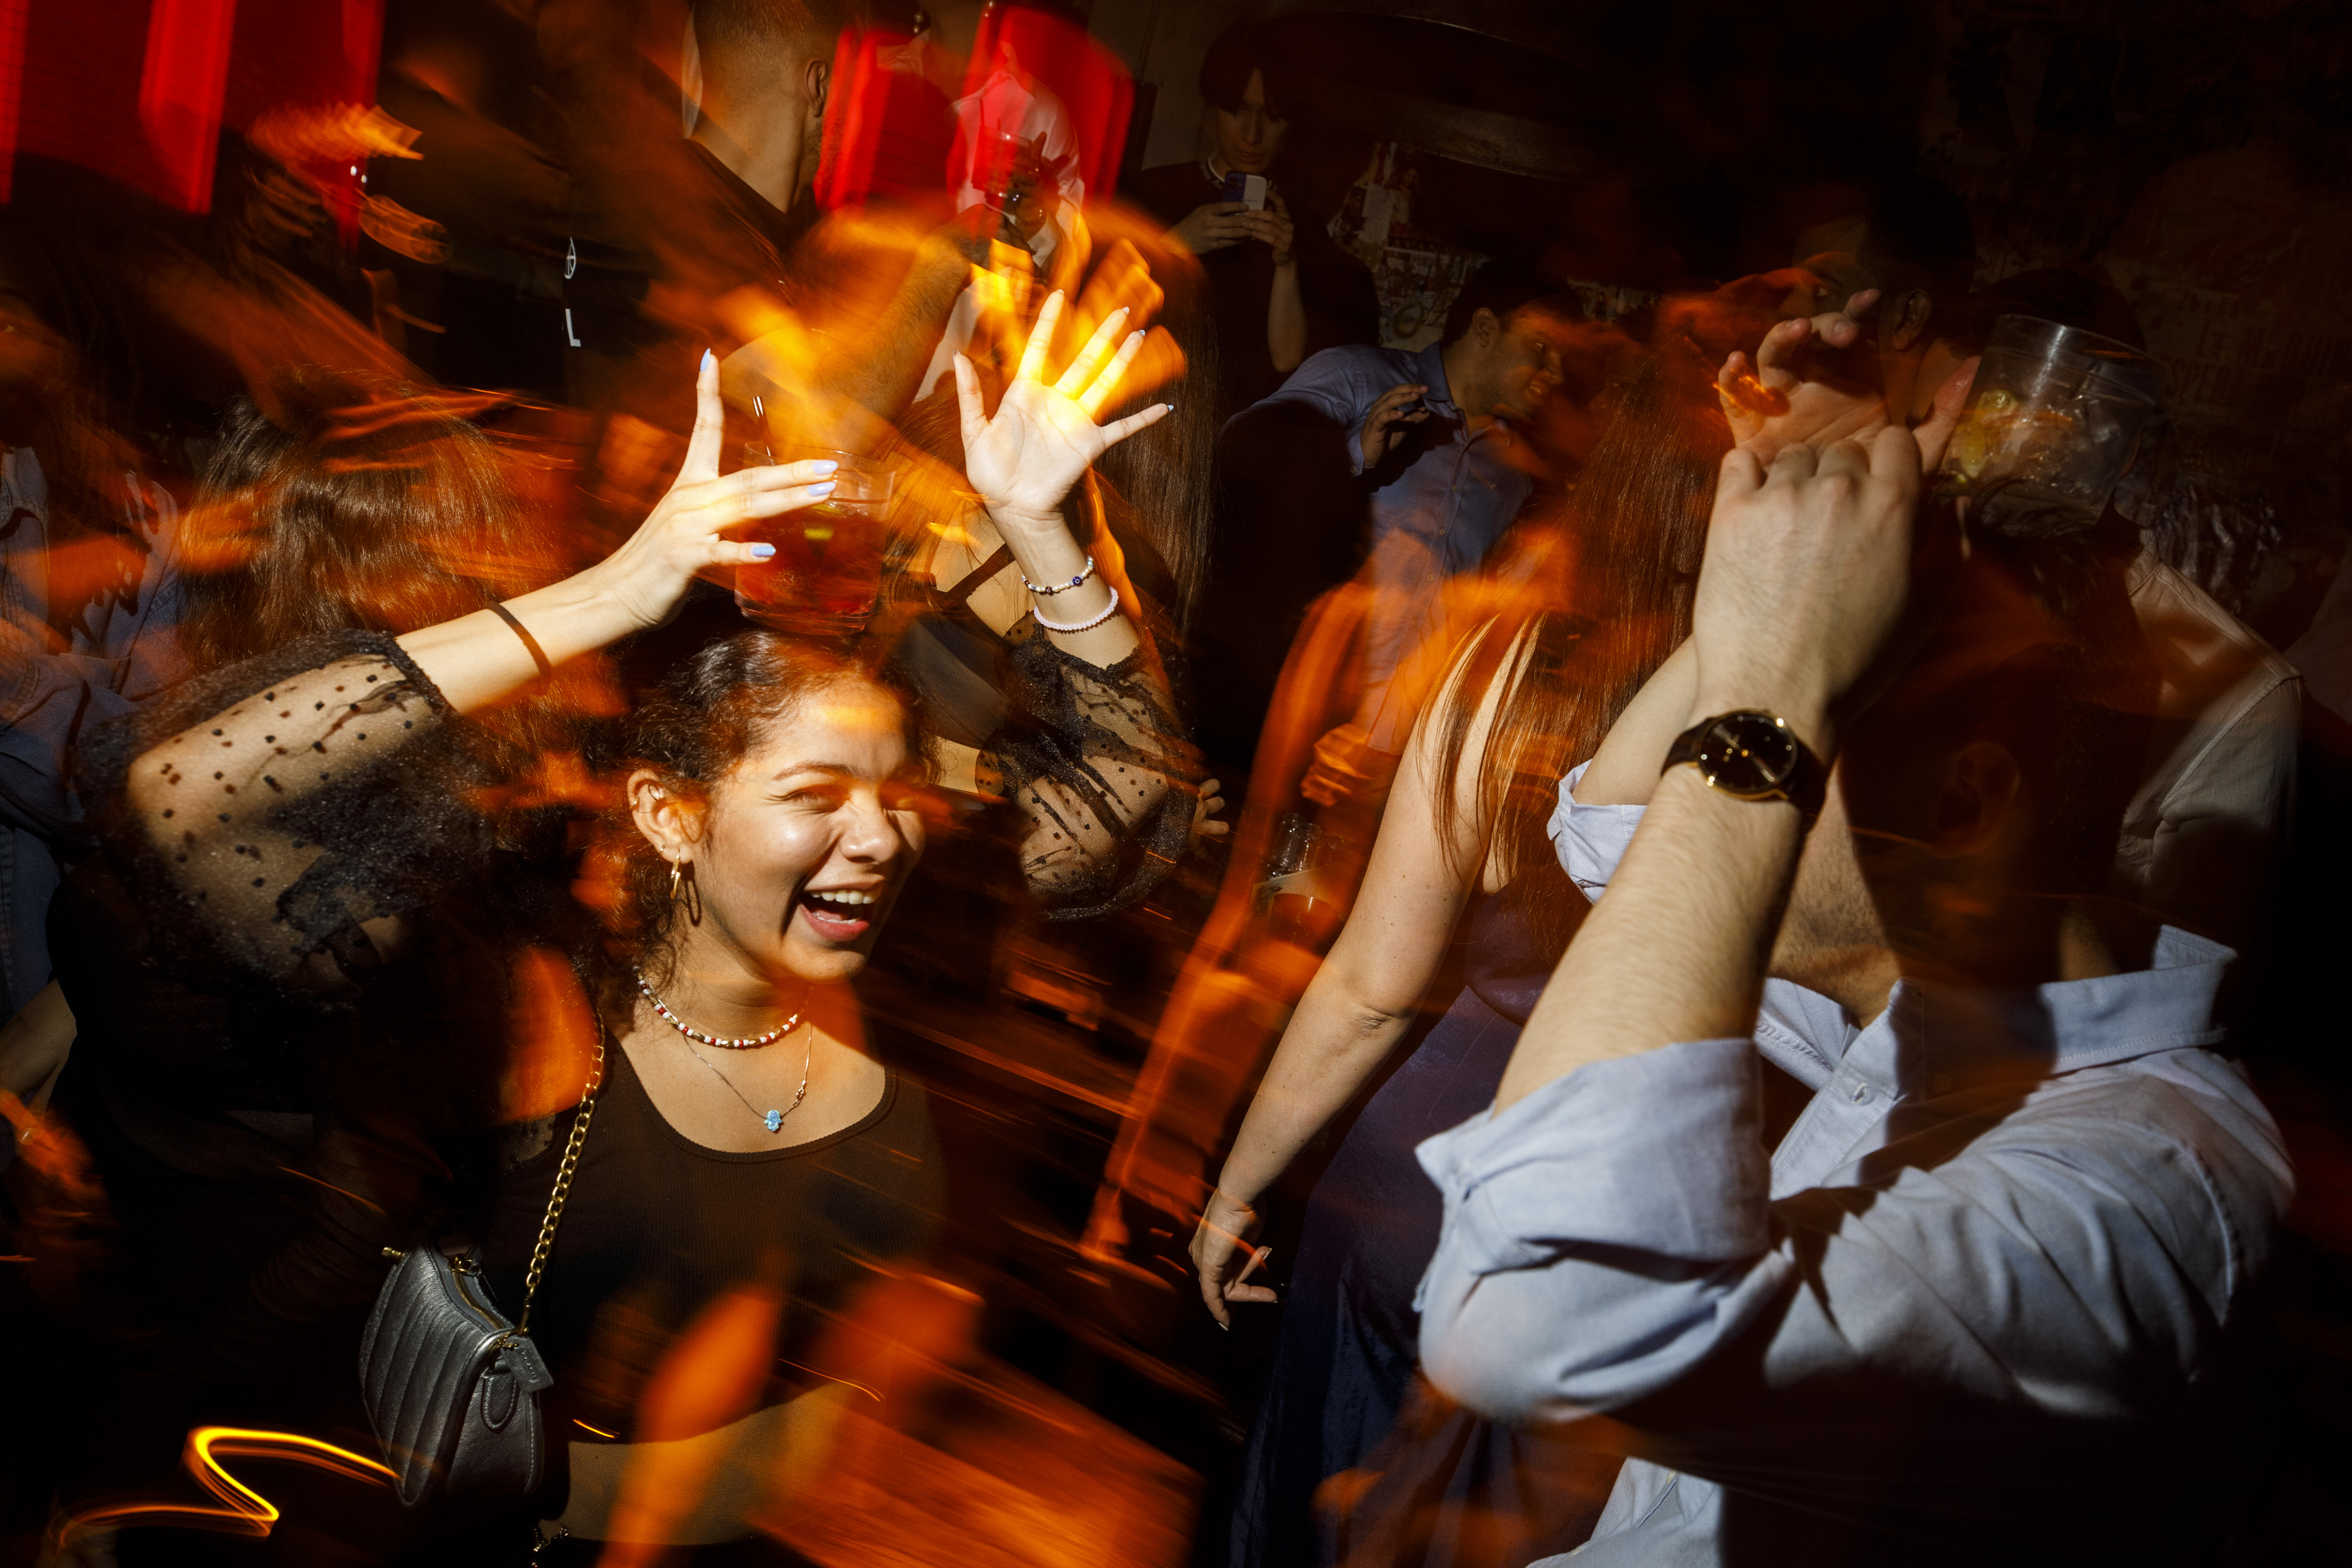 These are the most popular nightclubs in Boston, according to